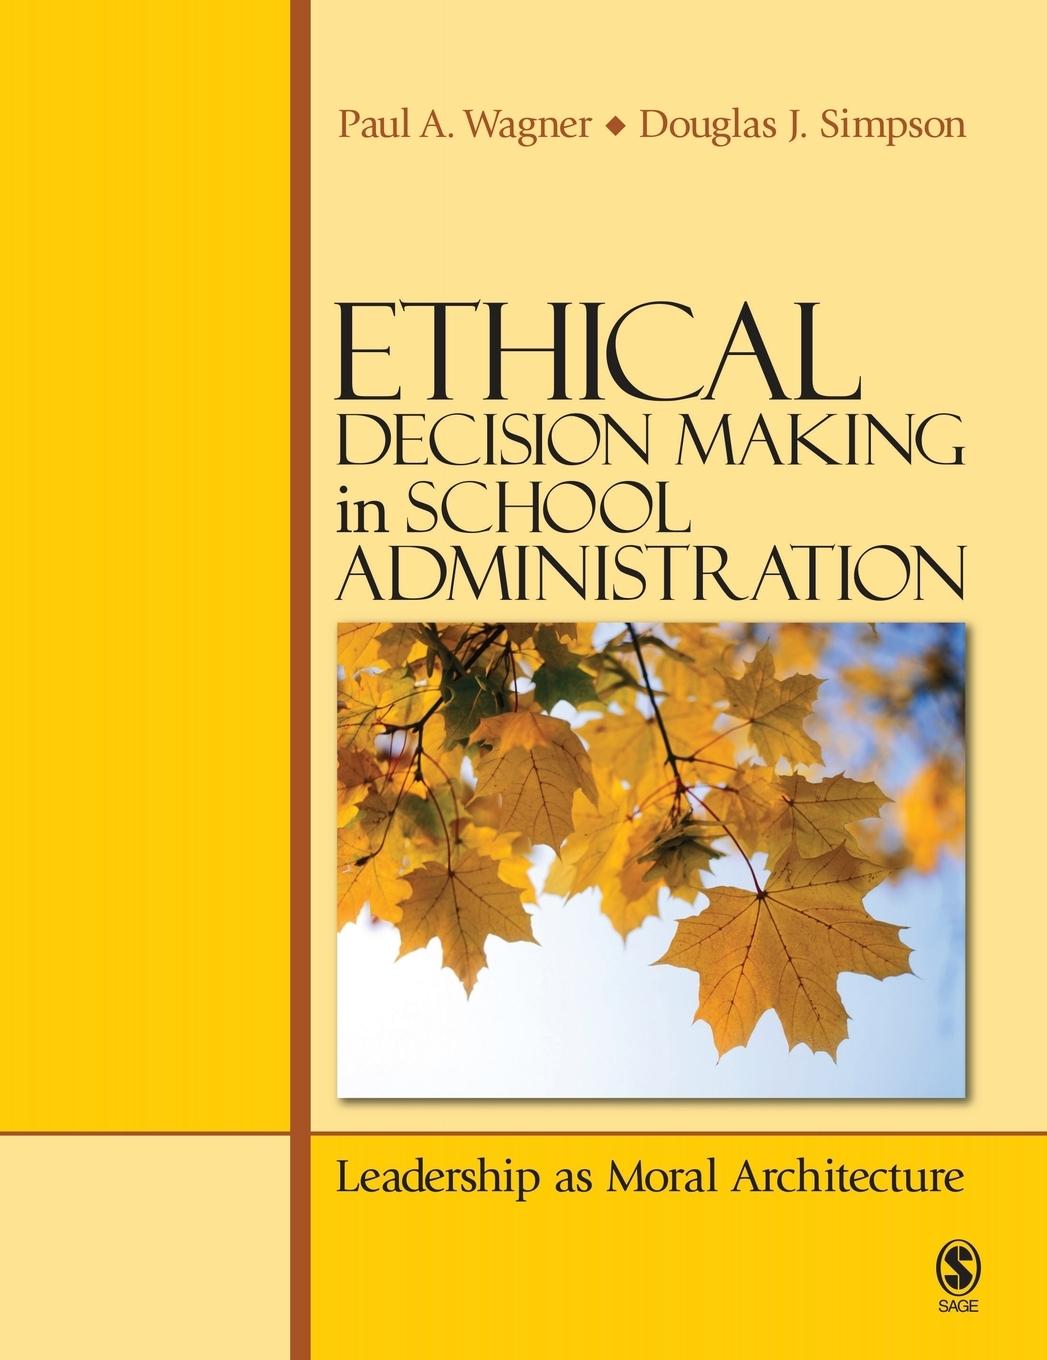 ETHICAL DECISION MAKING IN SCH - Wagner, Paul A. Simpson, Douglas J.